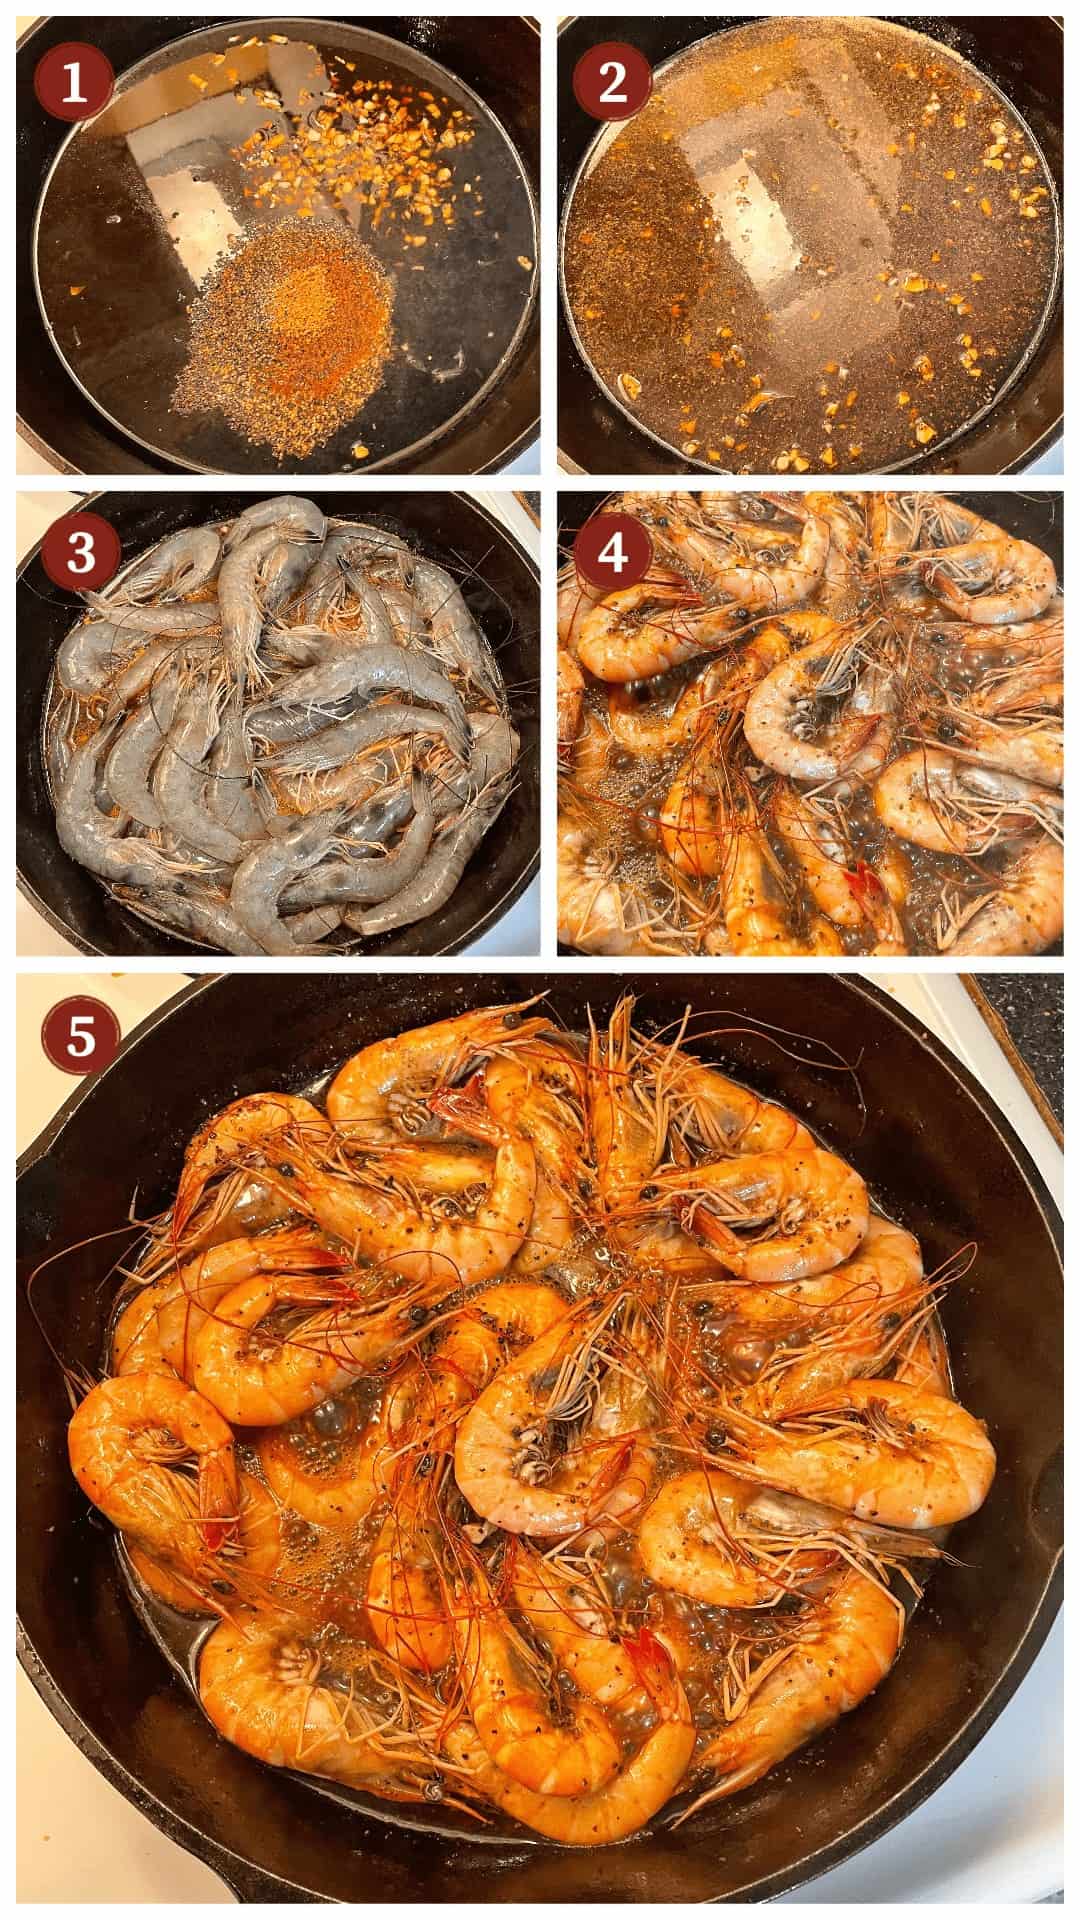 A collage of images showing how to make New Orleans BBQ Shrimp, steps 1-5.